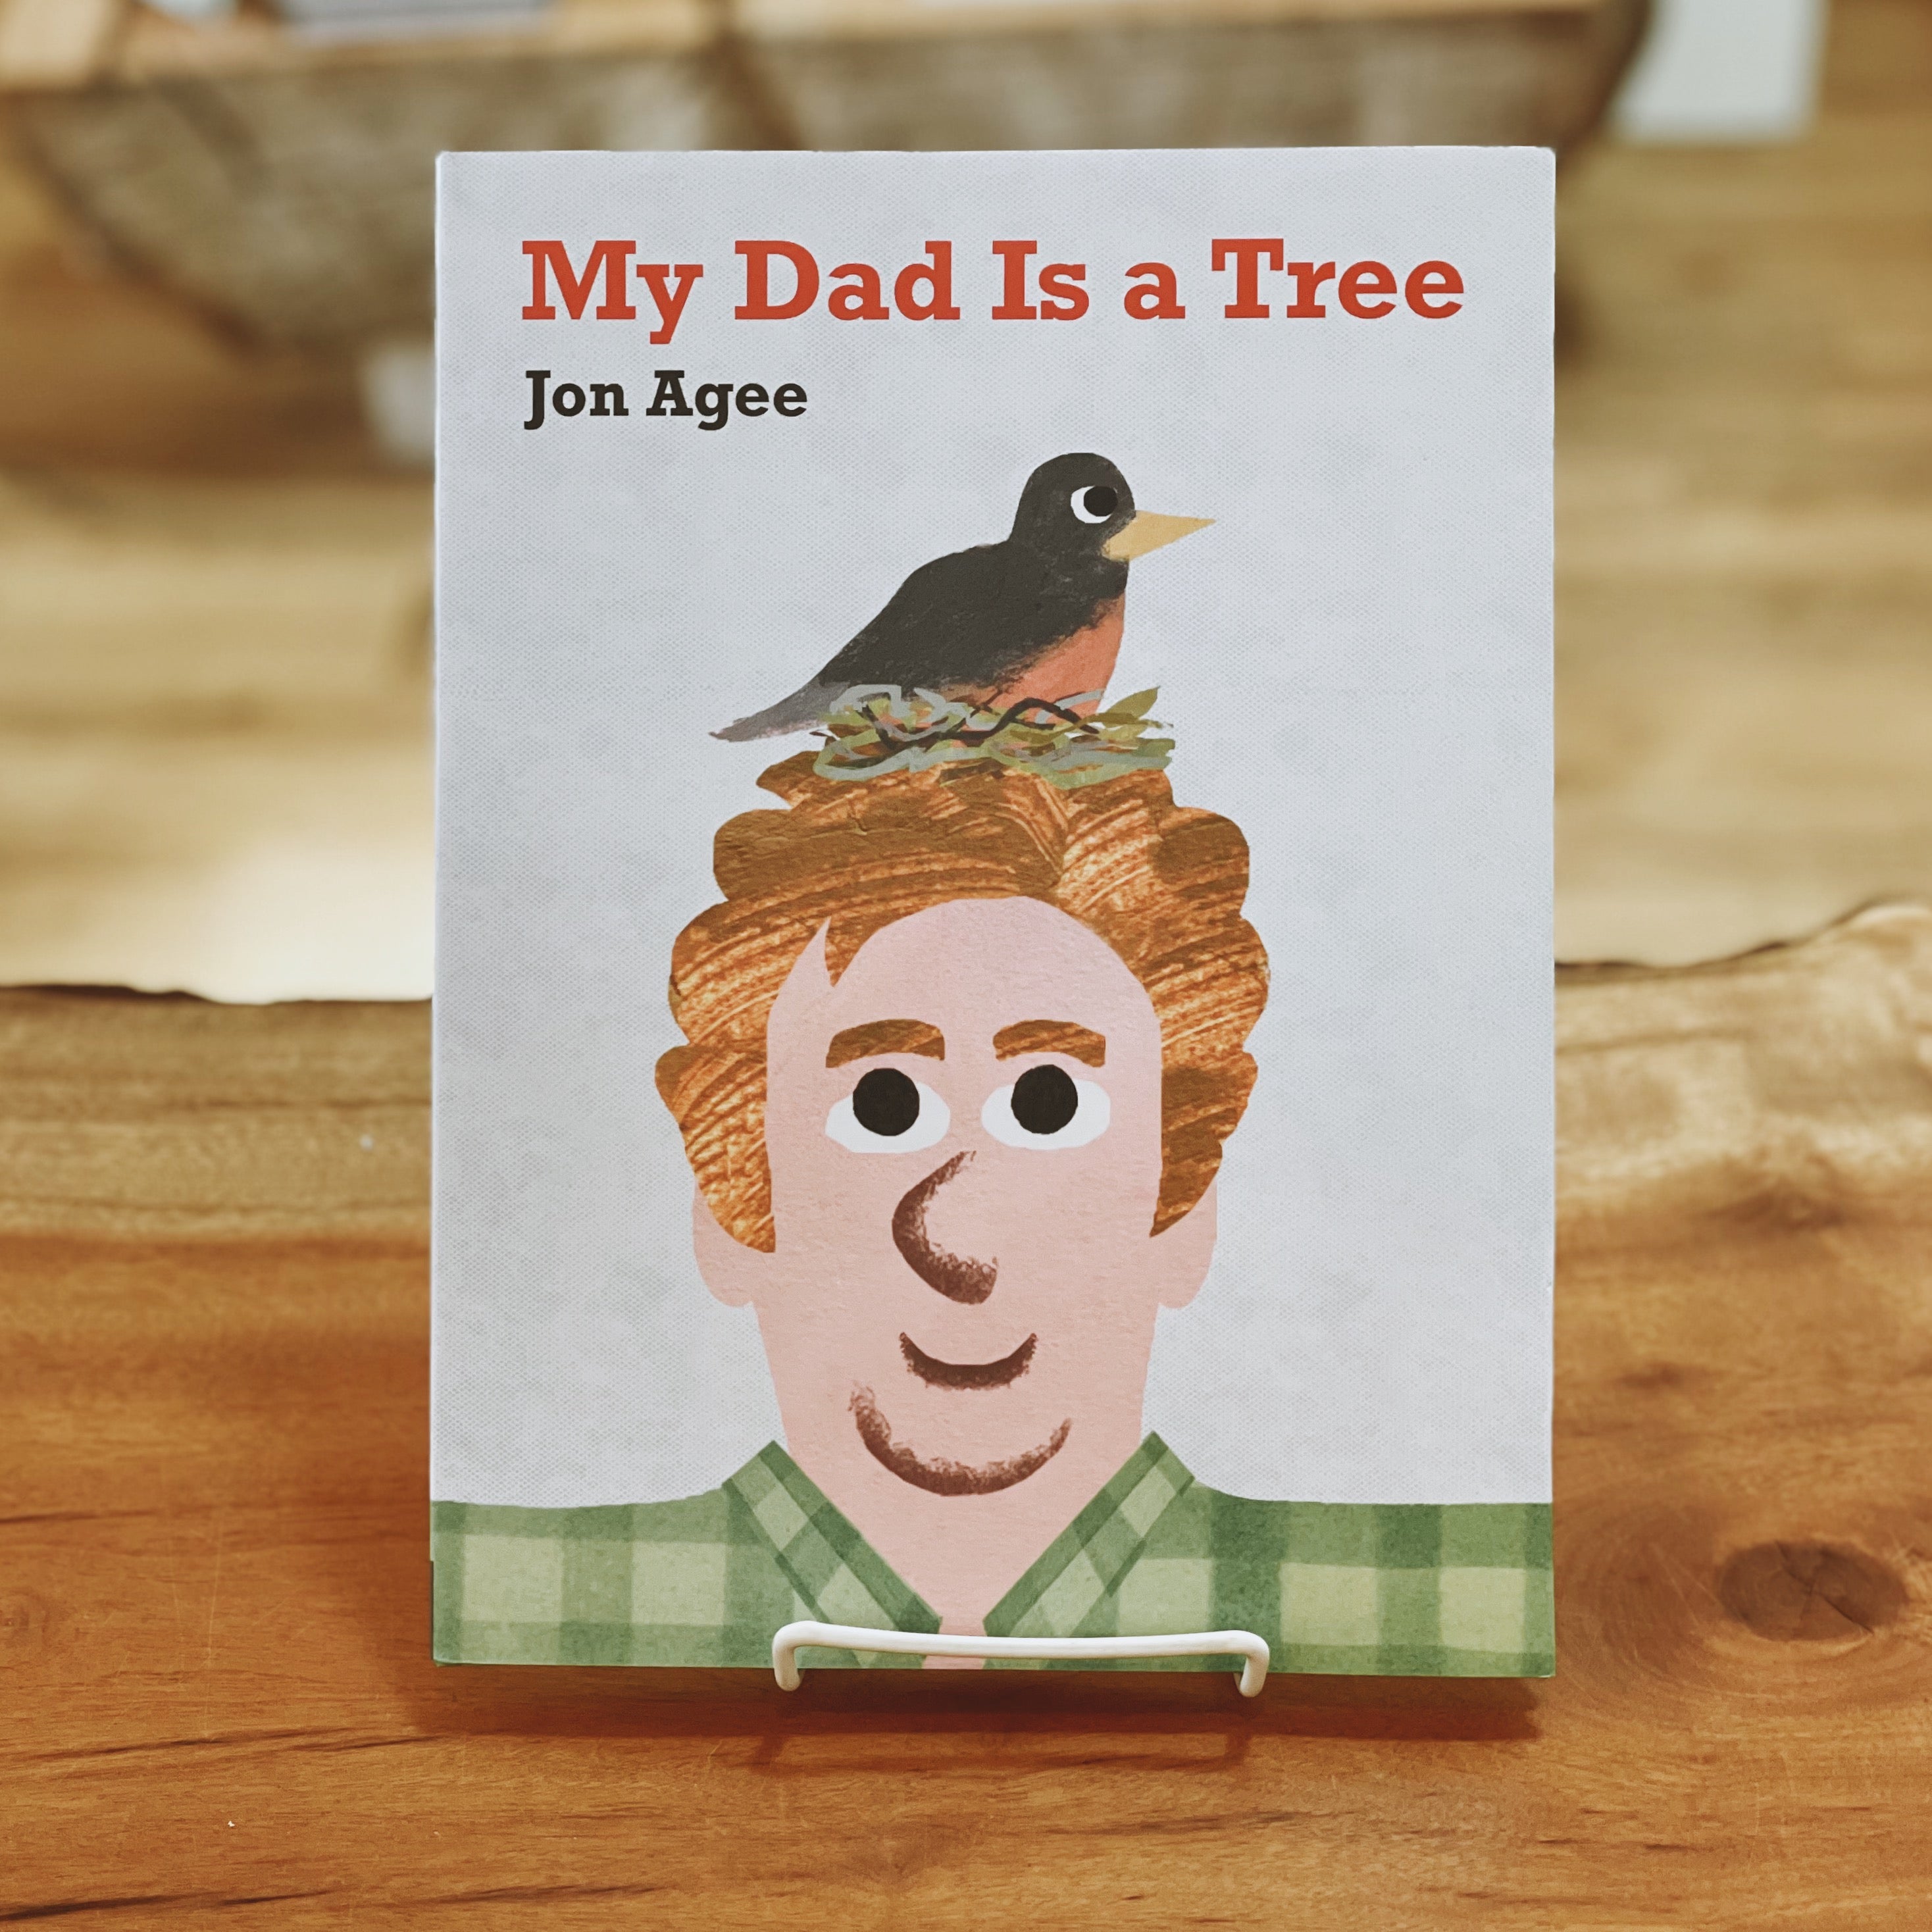 My Dad Is a Tree